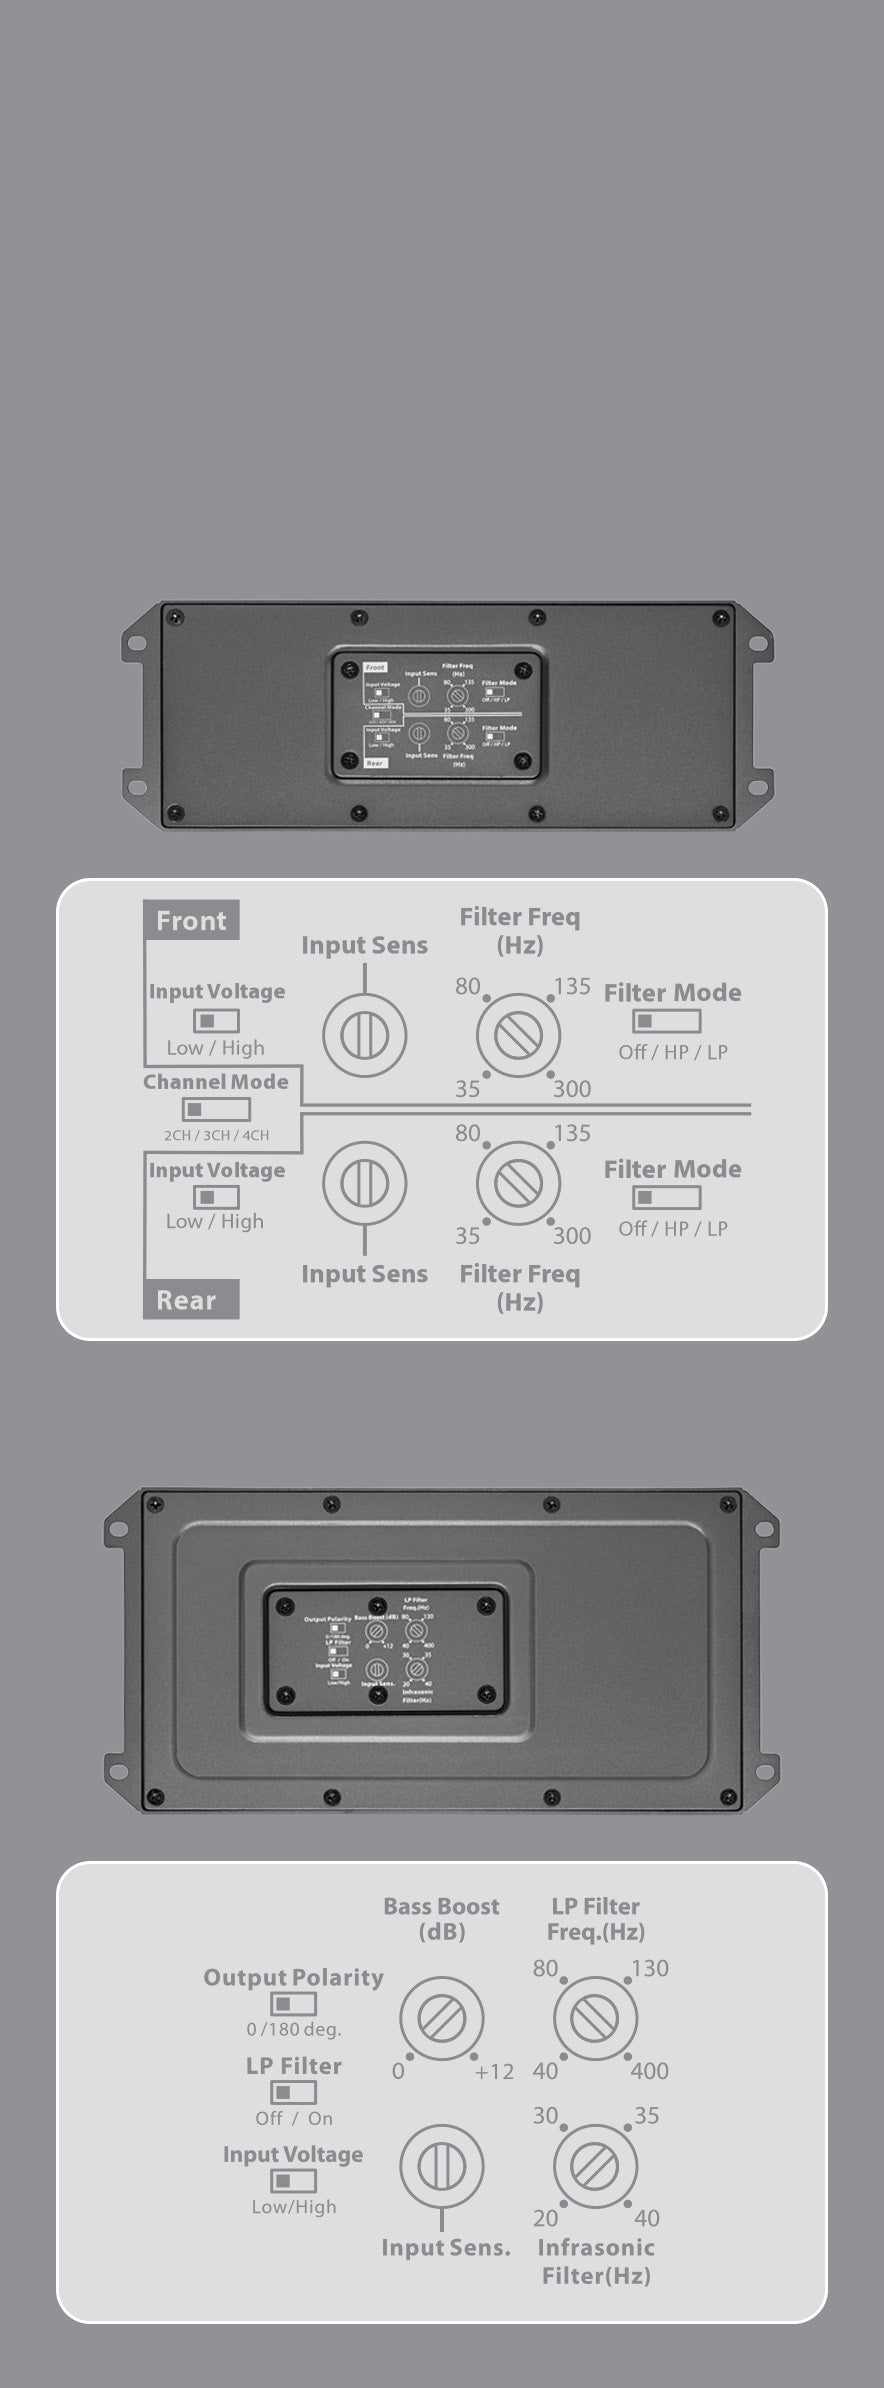 An image displaying controls for two different MX amplifiers.